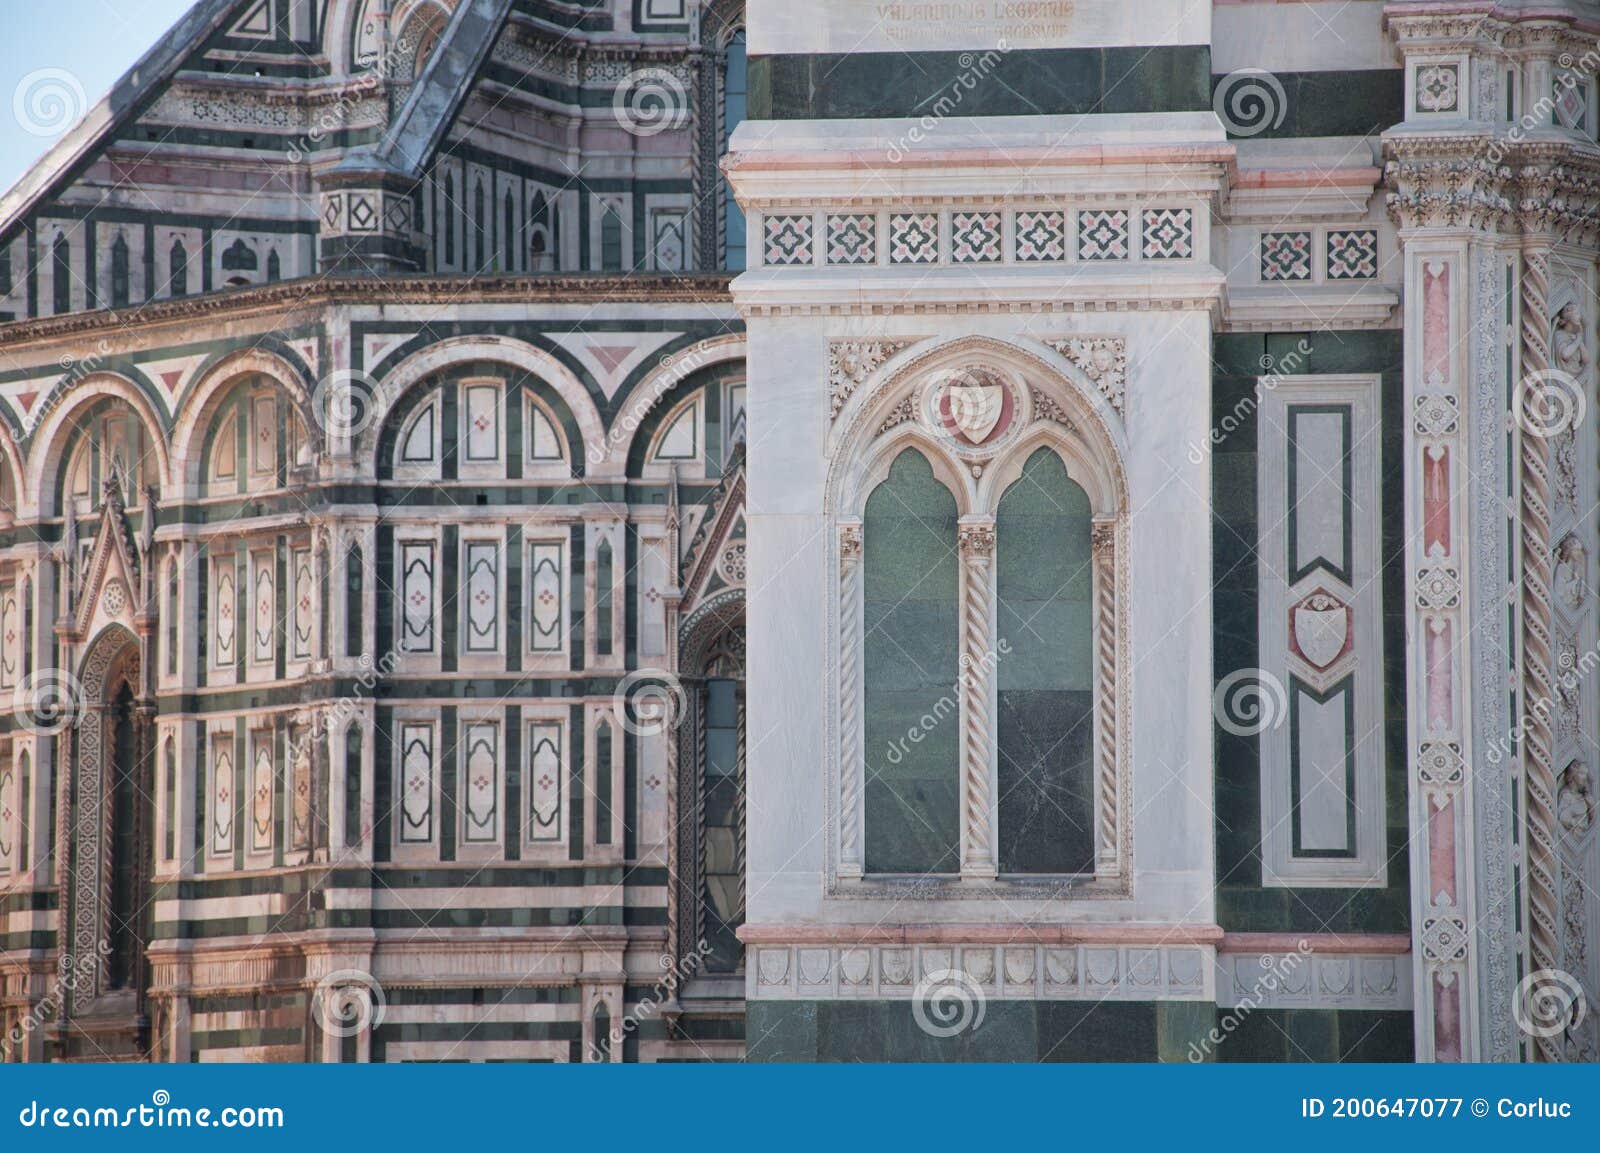 unconventional view of the dome of florence